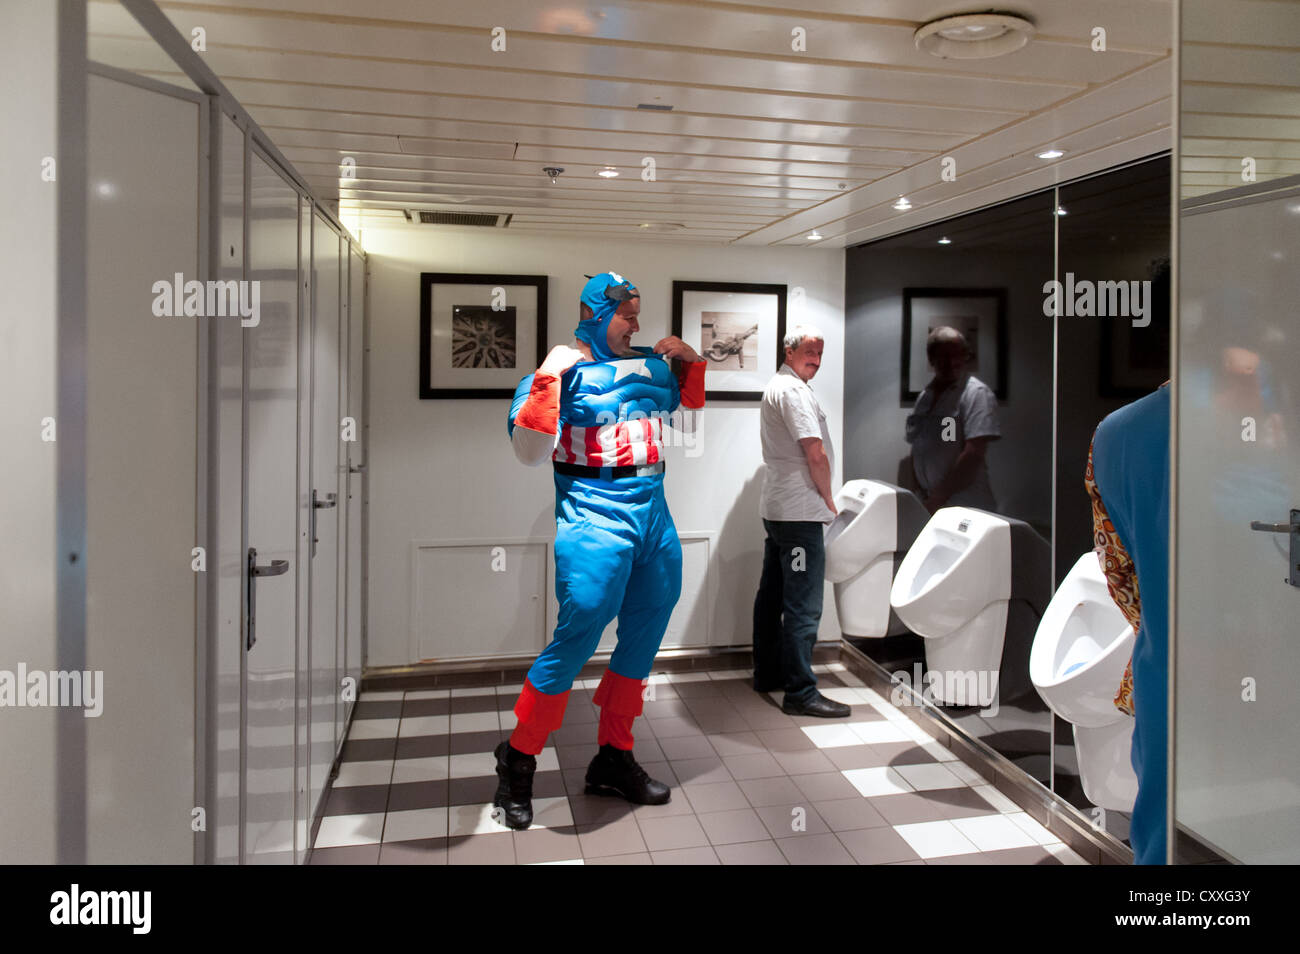 Captain America checking his clothes in a men's toilet Stock Photo - Alamy